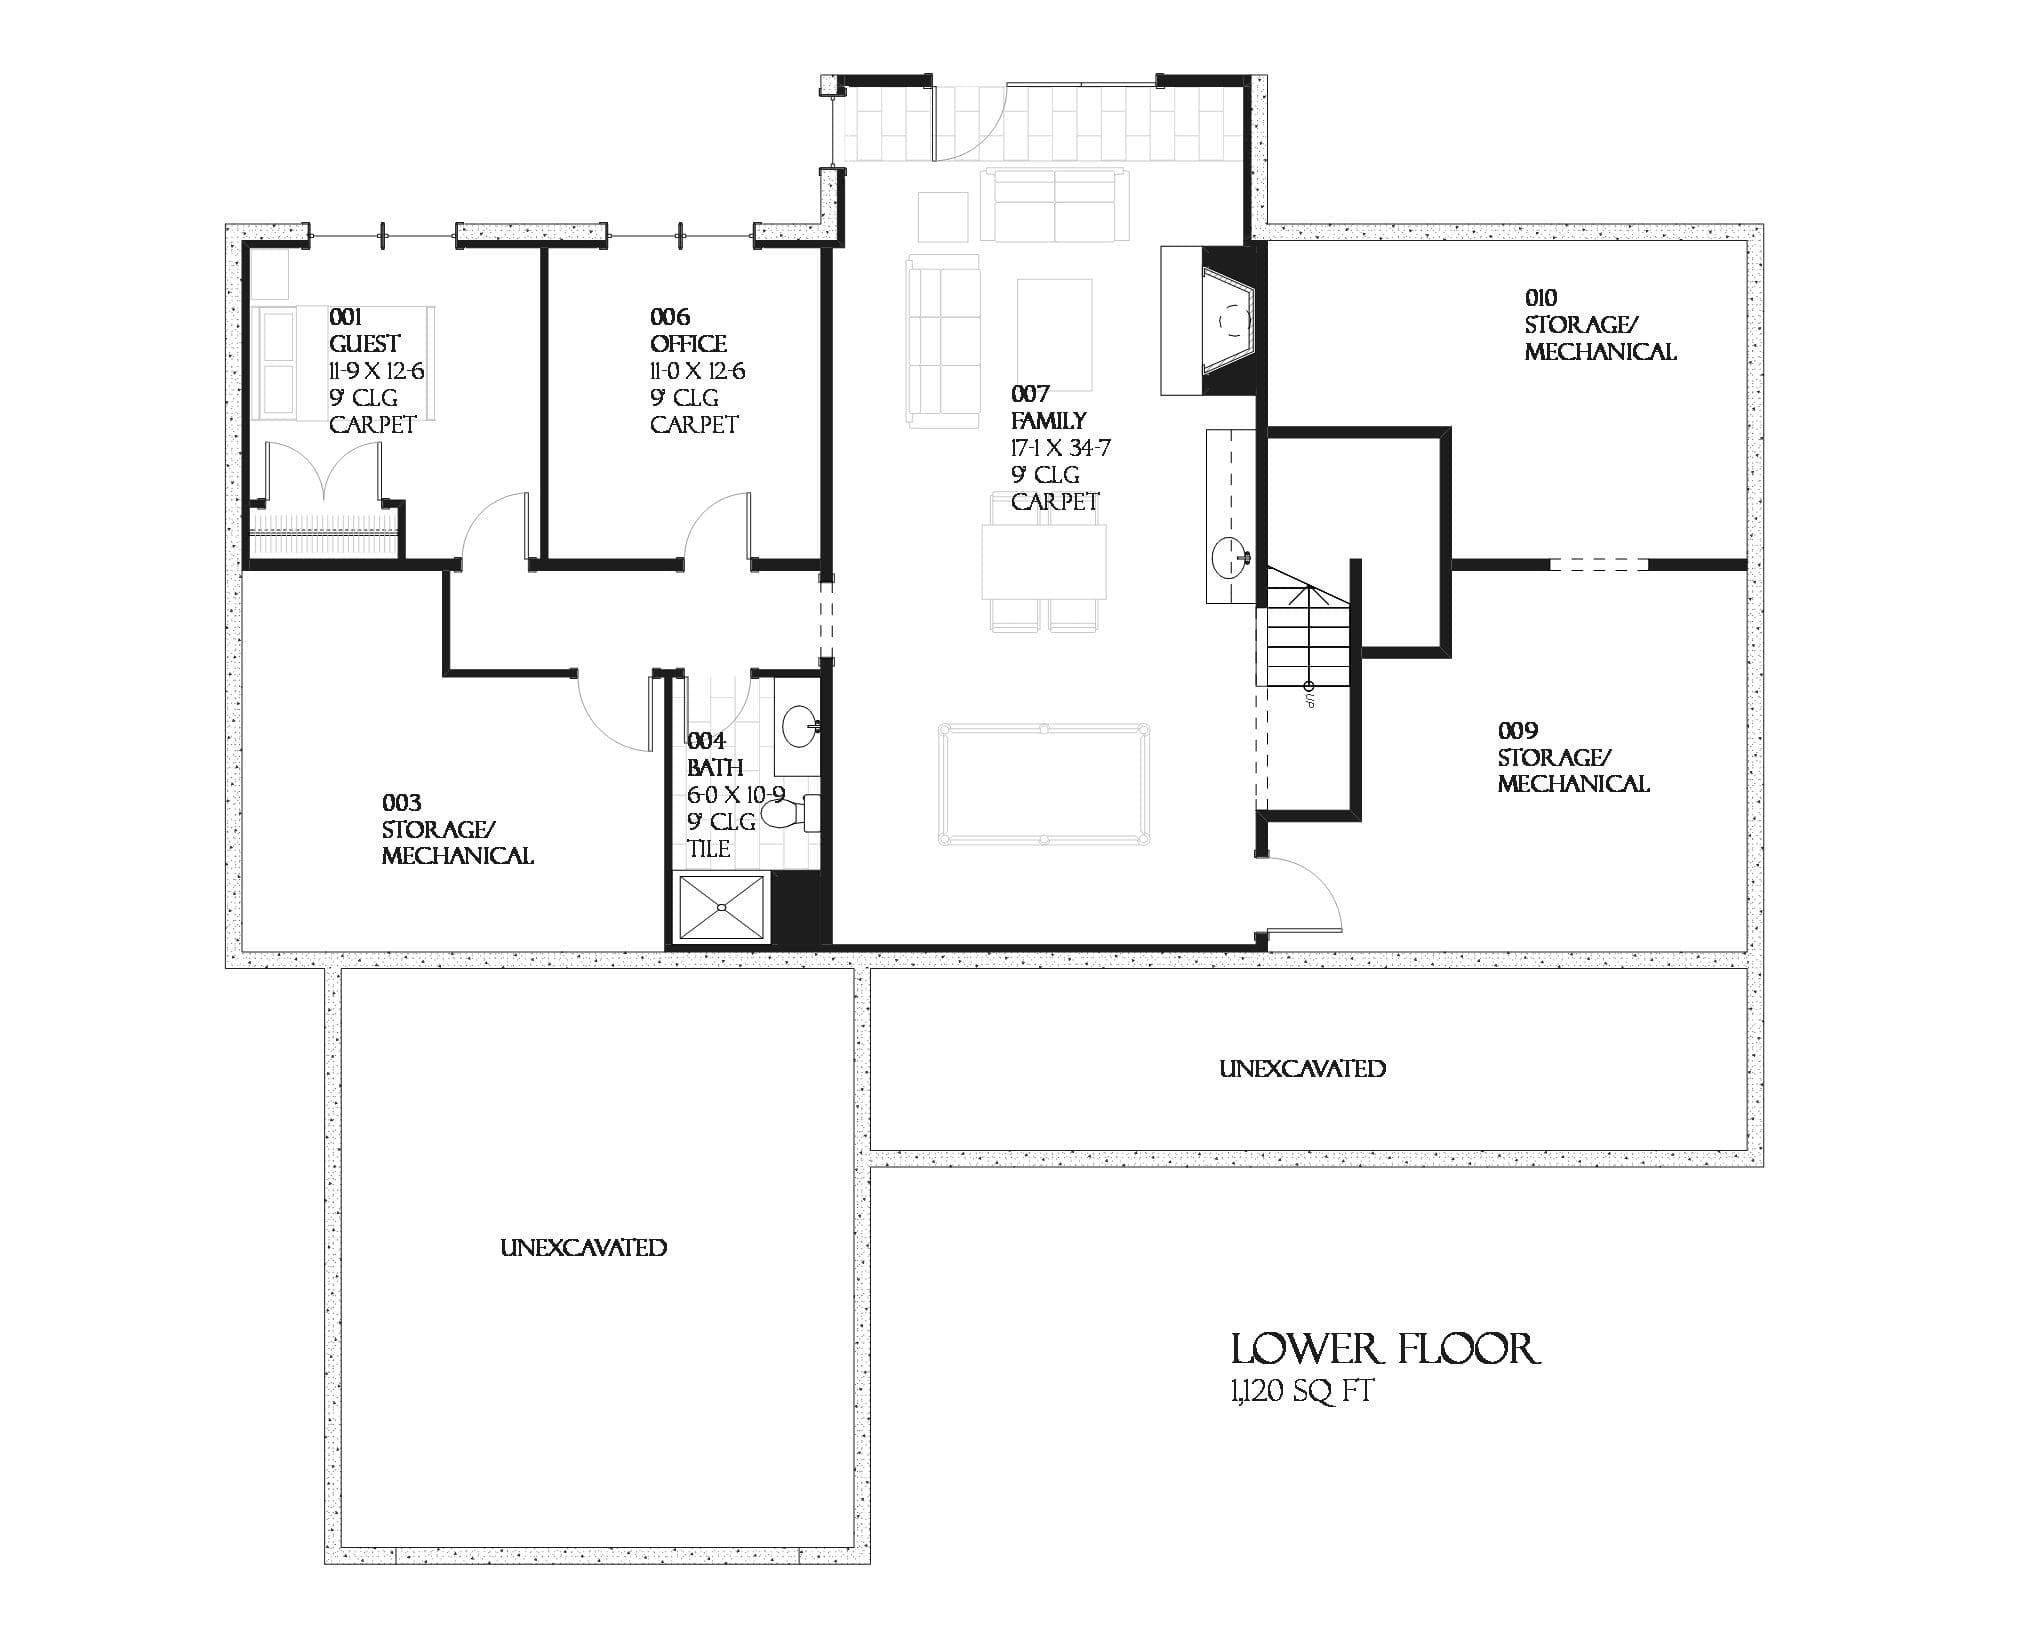 Maricel - Home Design and Floor Plan - SketchPad House Plans